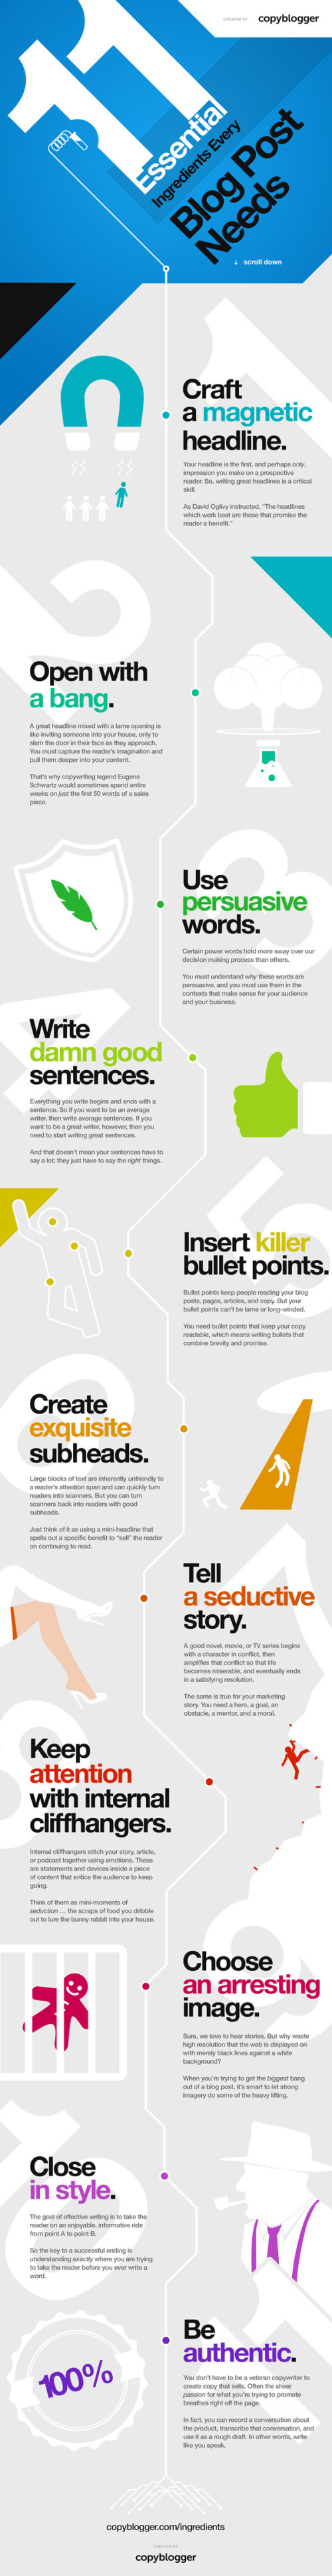 11 Essential Ingredients Every Blog Post Needs infographic